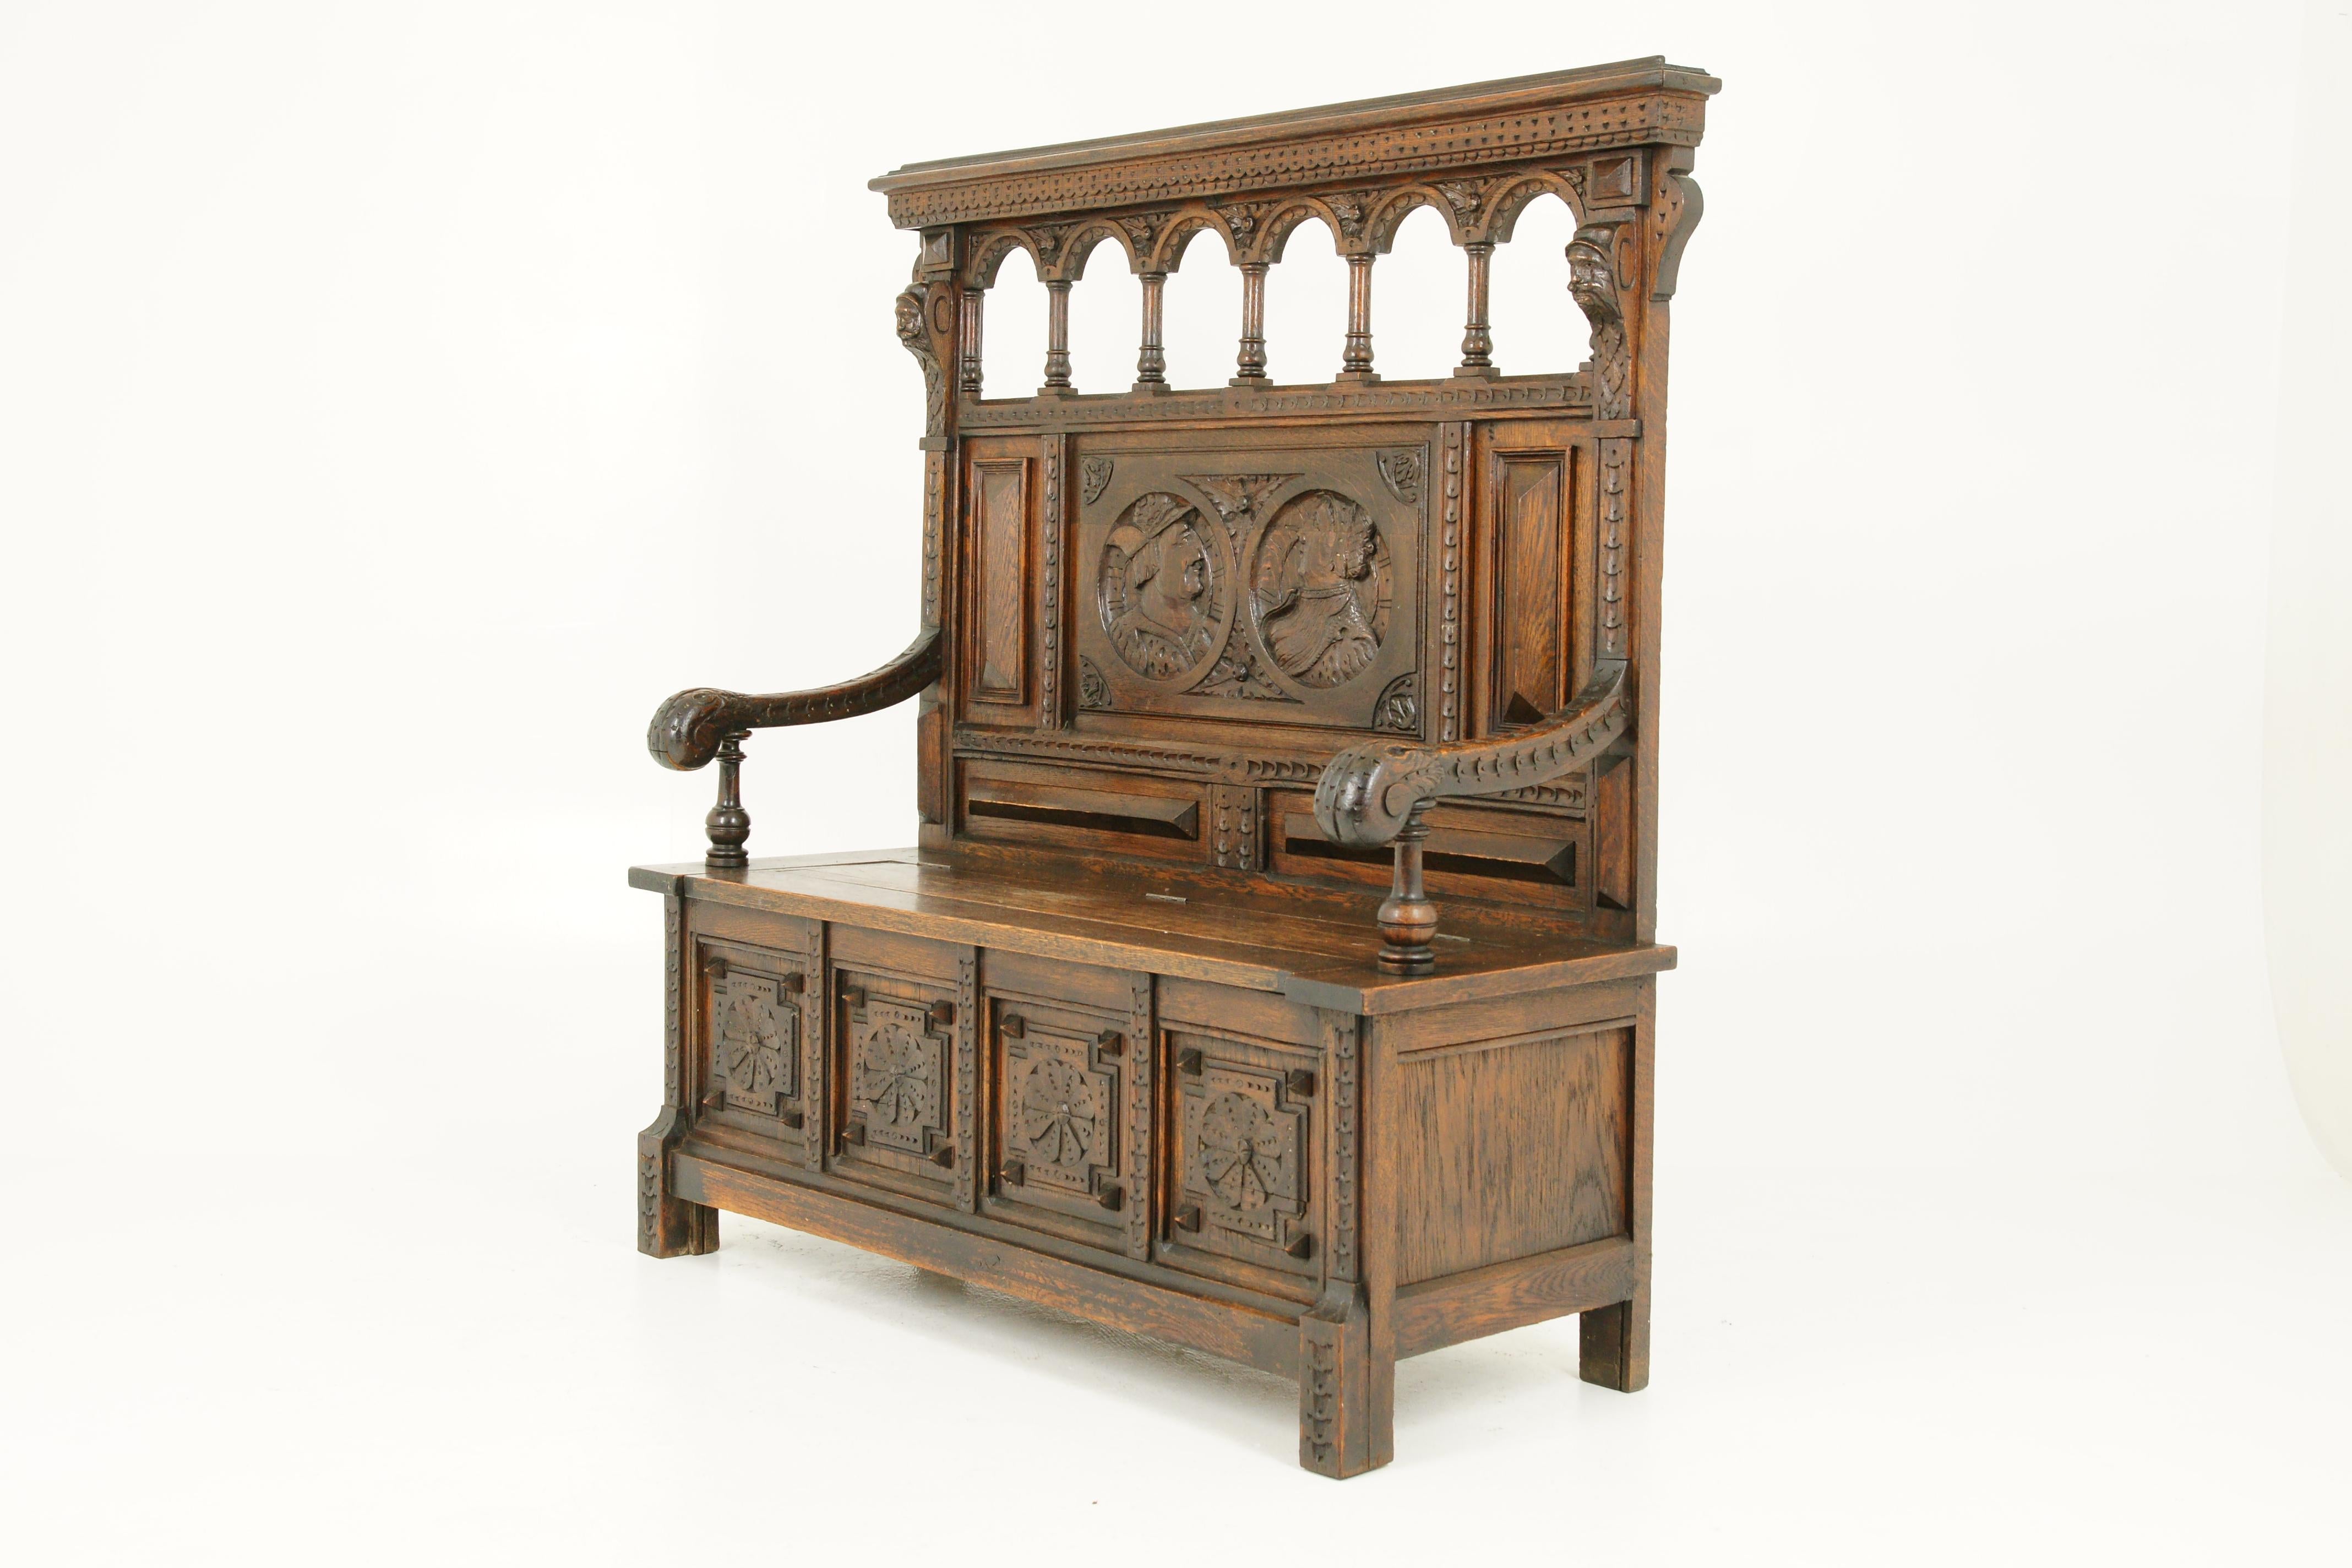 Antique hall bench, monks bench, settle, hall seat, Entryway Furniture, Scotland 1870, B1742

Scotland, 1870
solid oak construction with original finish
carved shaped back
the center having carved figures
flanked by raised panels
carved out swept